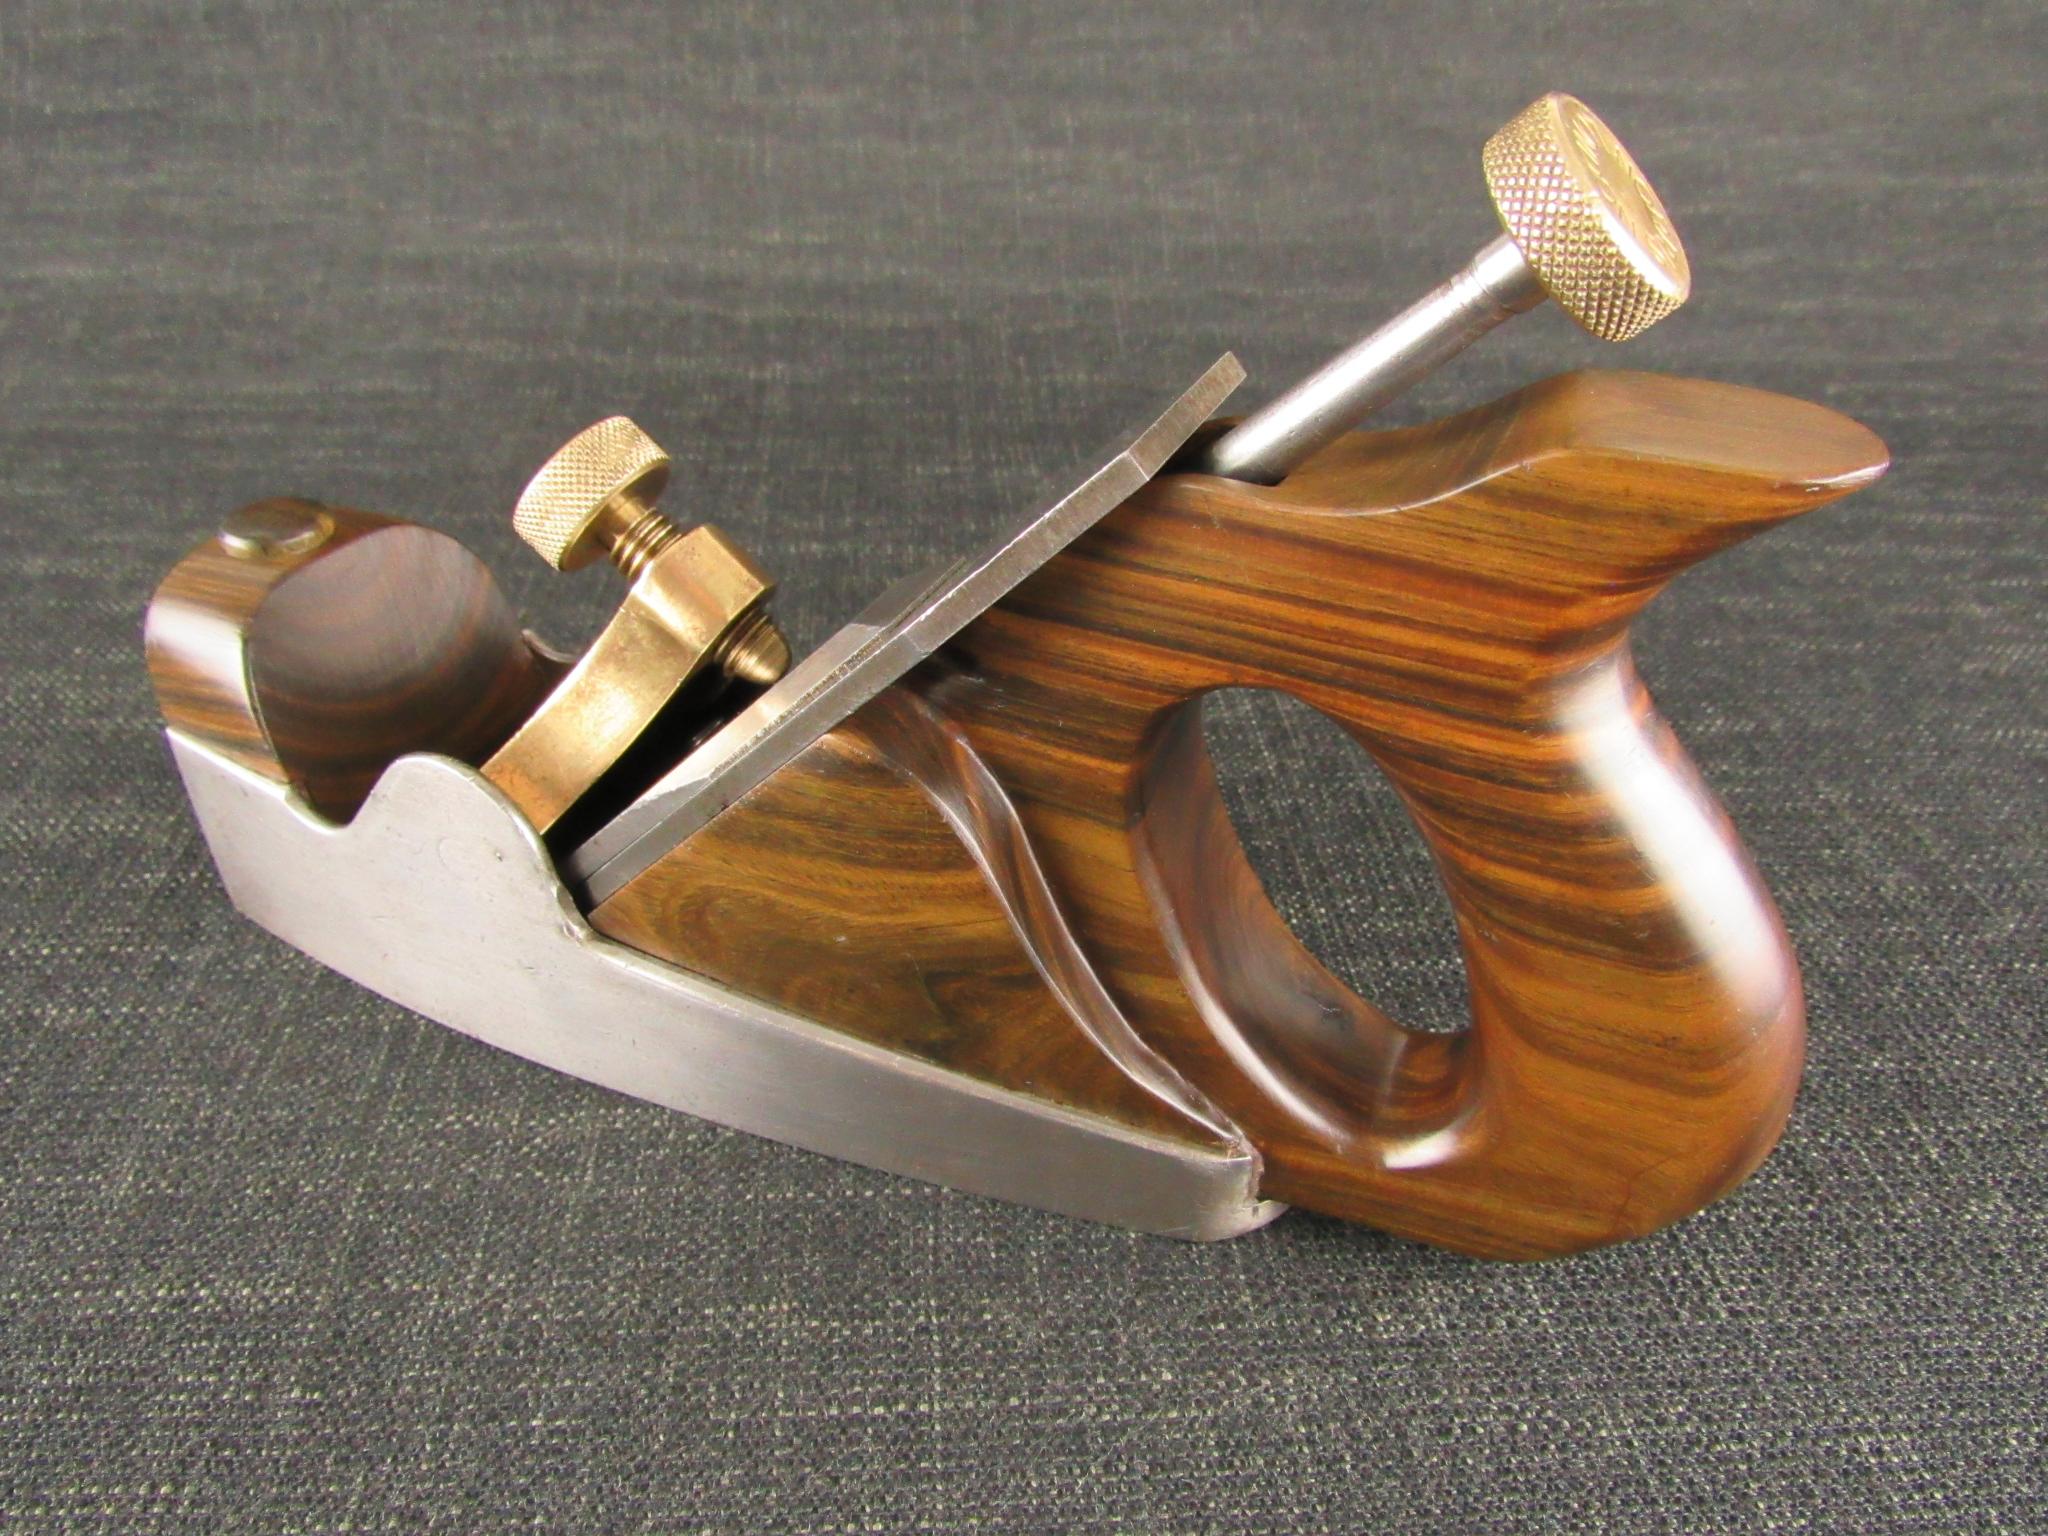 Unique NORRIS A5 Smoothing Plane